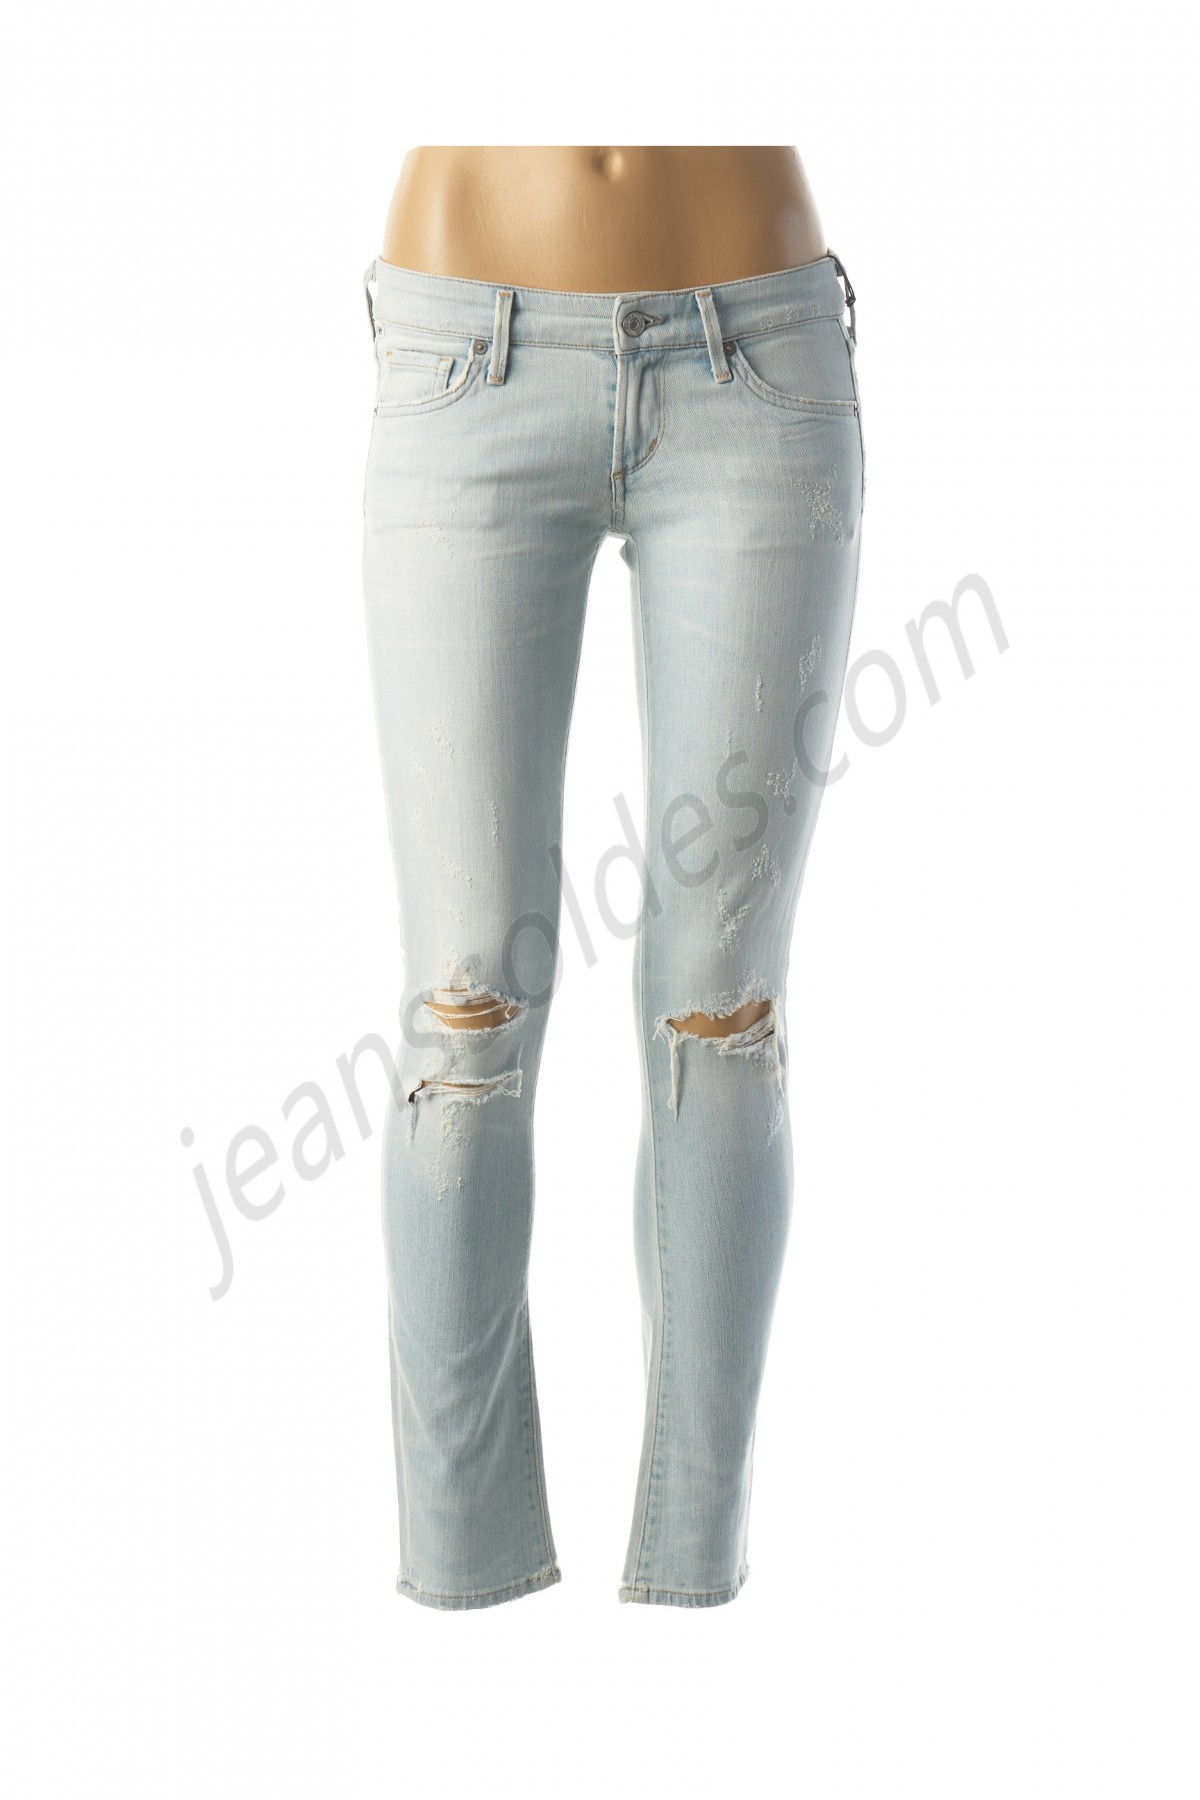 citizens of humanity-Jeans coupe slim prix d’amis - -0